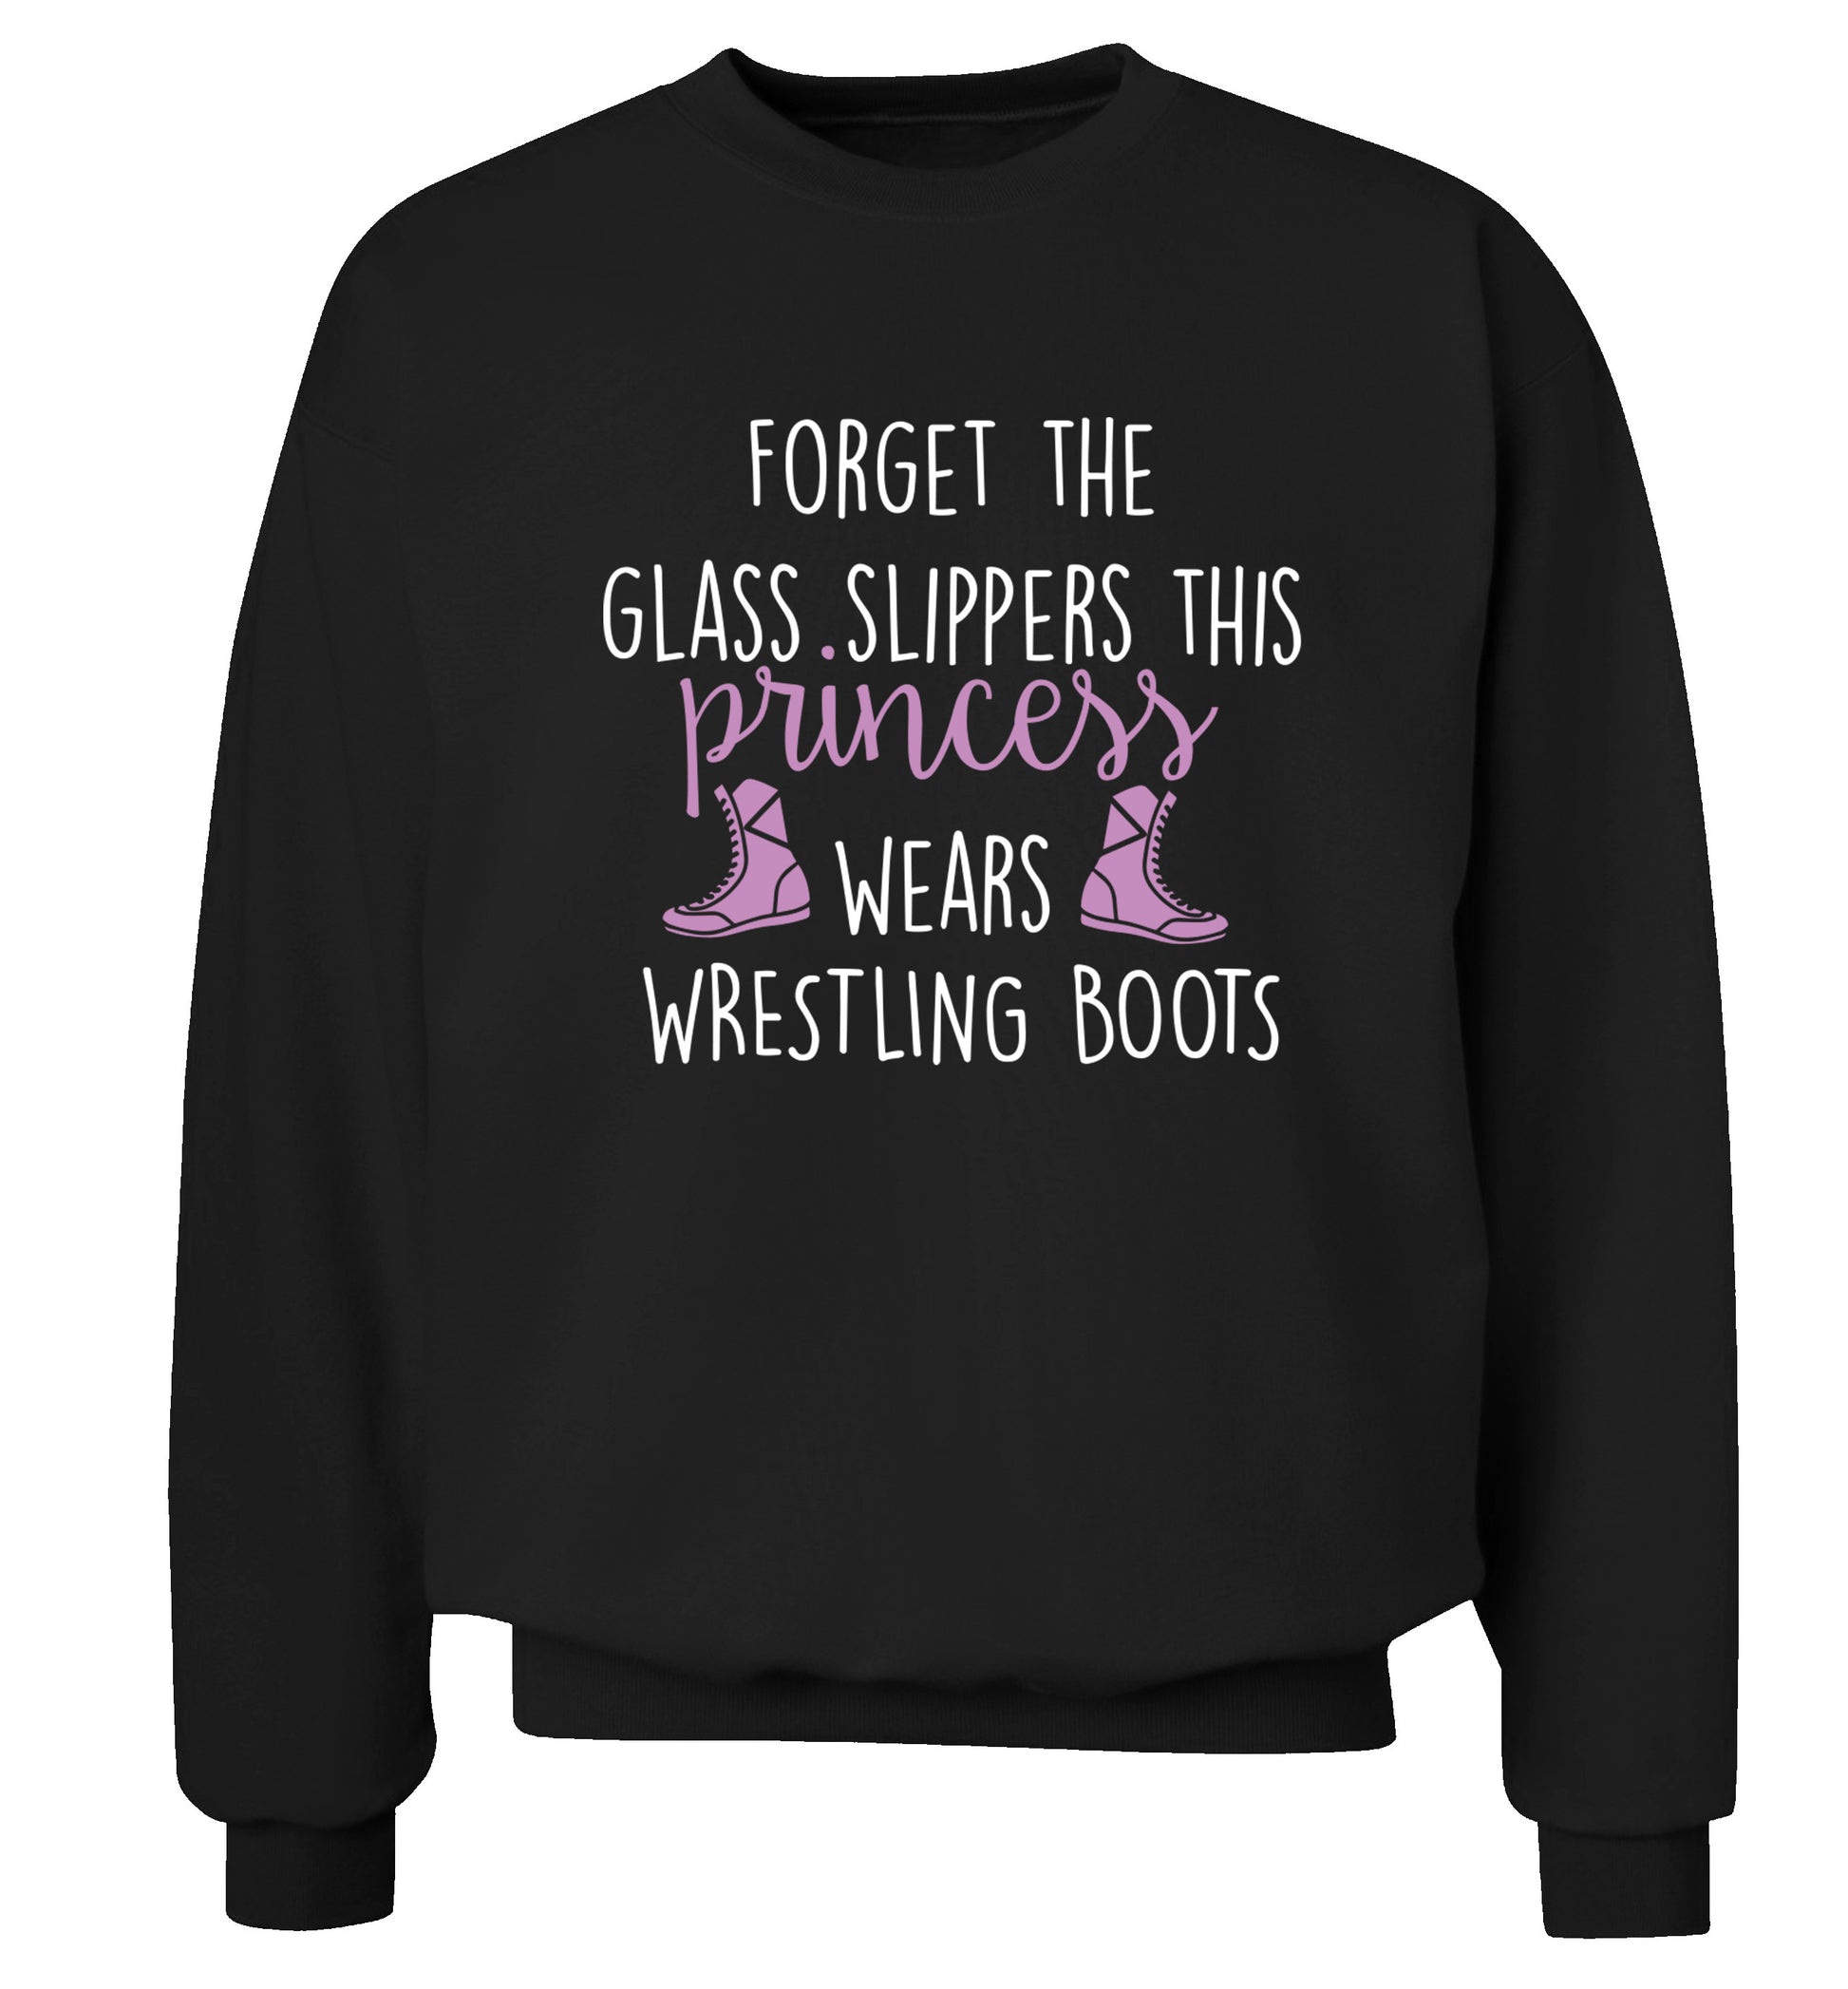 Forget the glass slippers this princess wears wrestling boots Adult's unisex black Sweater 2XL